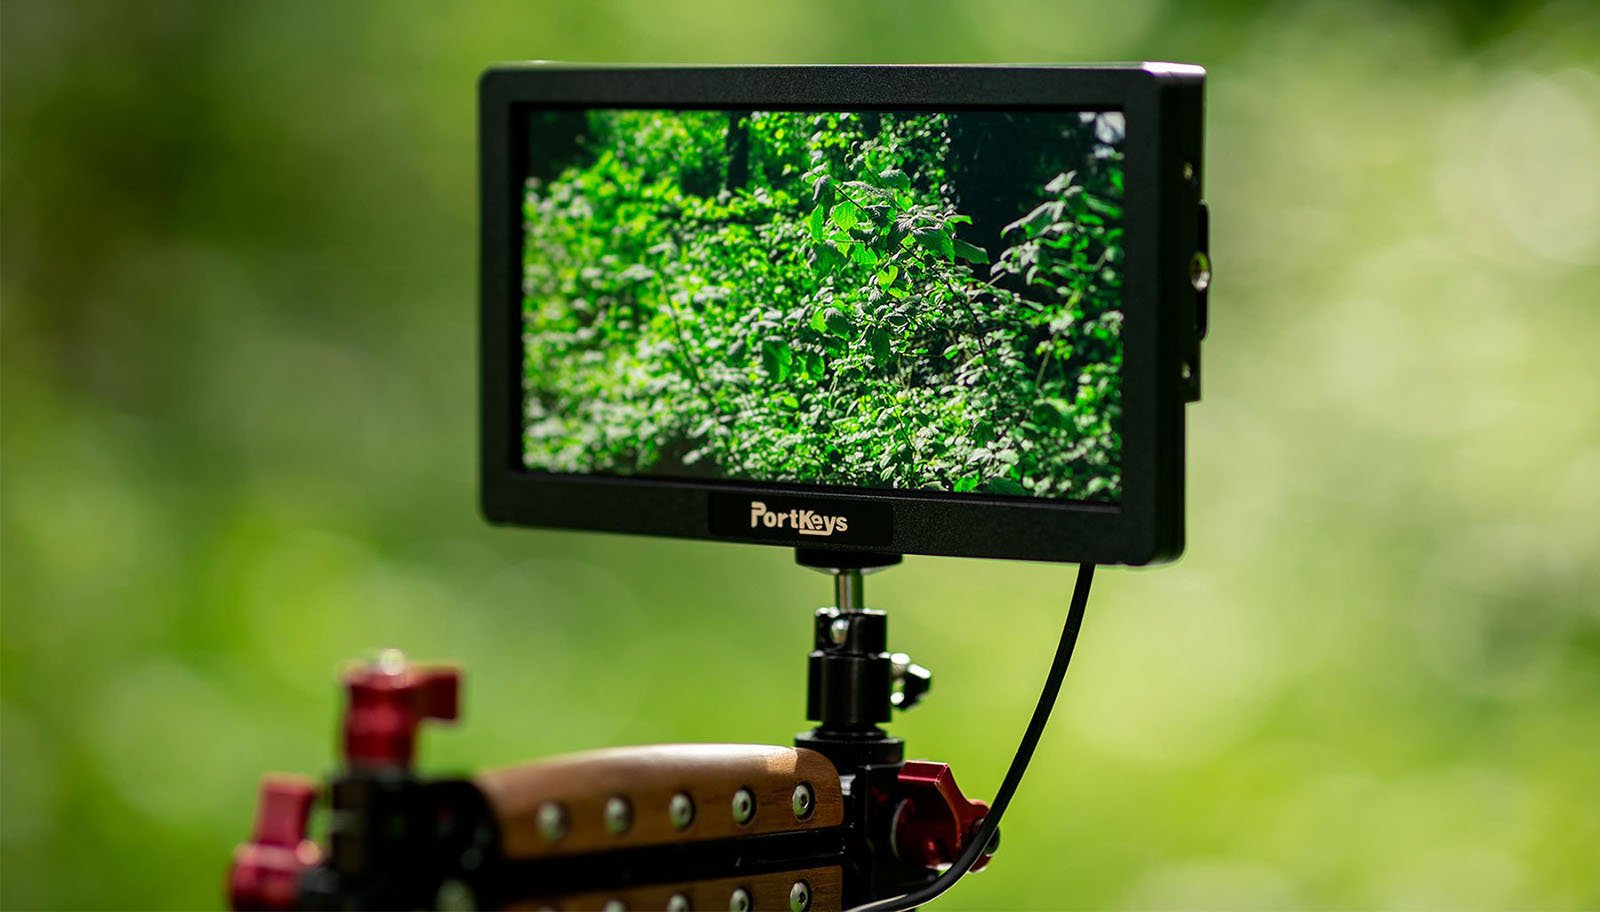 A monitor displaying an image of lush green foliage is mounted on a camera rig outdoors. The sun illuminates the surrounding greenery, creating a vibrant, verdant scene on the screen and in the background. The monitor brand, PortKeys, is visible beneath the screen.